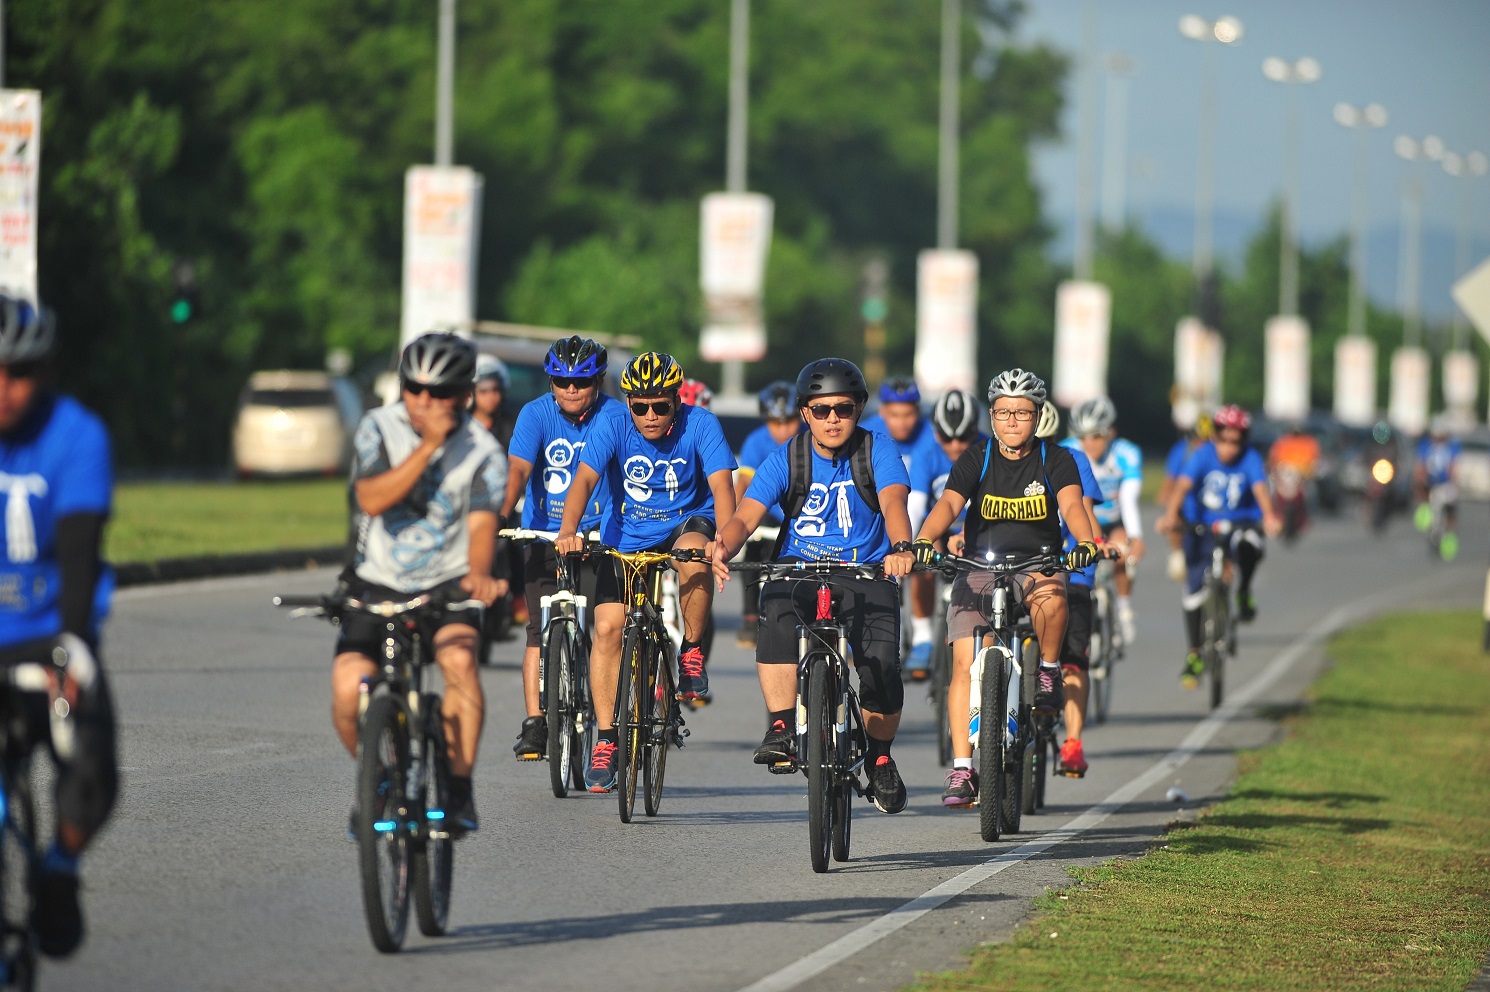 3_Blue wave - cyclists rolling down the road in support of orang-utan and shark conservation